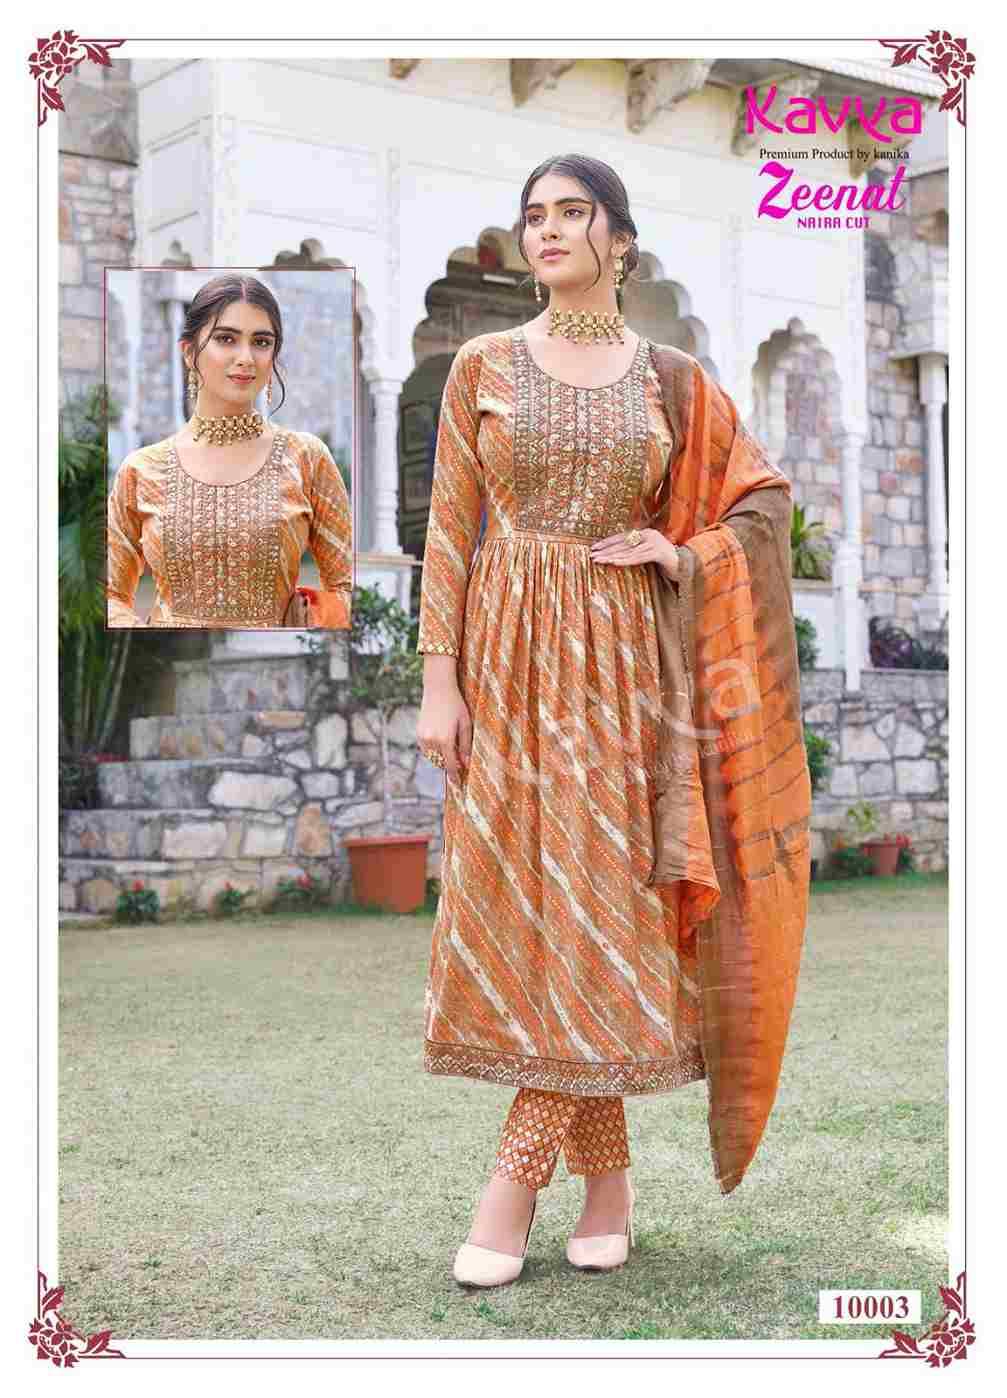 Zeenat Vol-10 By Kavya 10001 To 10010 Series Beautiful Stylish Festive Suits Fancy Colorful Casual Wear & Ethnic Wear & Ready To Wear Capsule Print Dresses At Wholesale Price